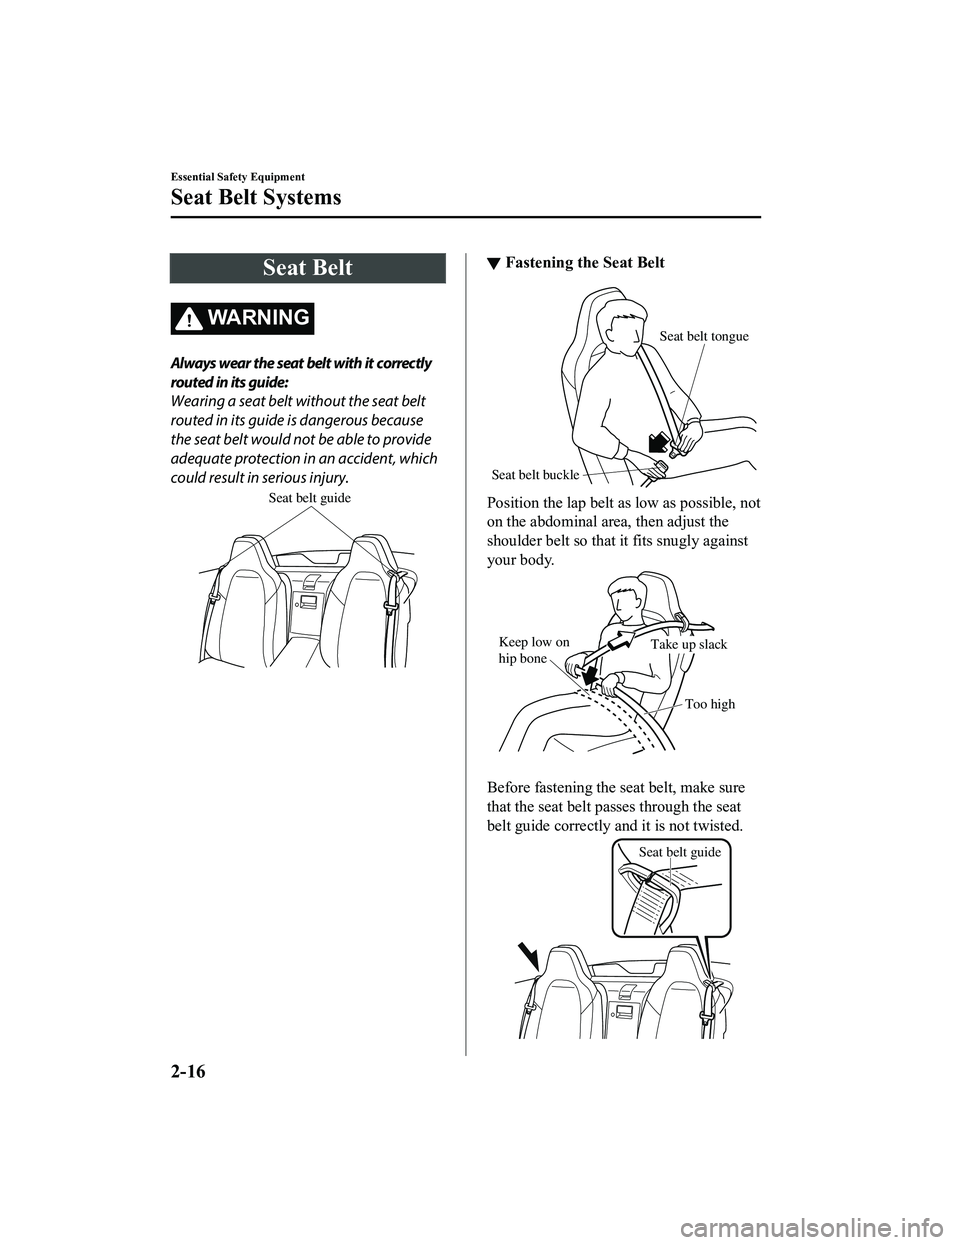 MAZDA MODEL MX-5 MIATA RF 2020 Owners Manual Seat Belt
WA R N I N G
Always wear the seat belt with it correctly
routed in its guide:
Wearing a seat belt without the seat belt
routed in its guide is dangerous because
the seat belt would not be ab